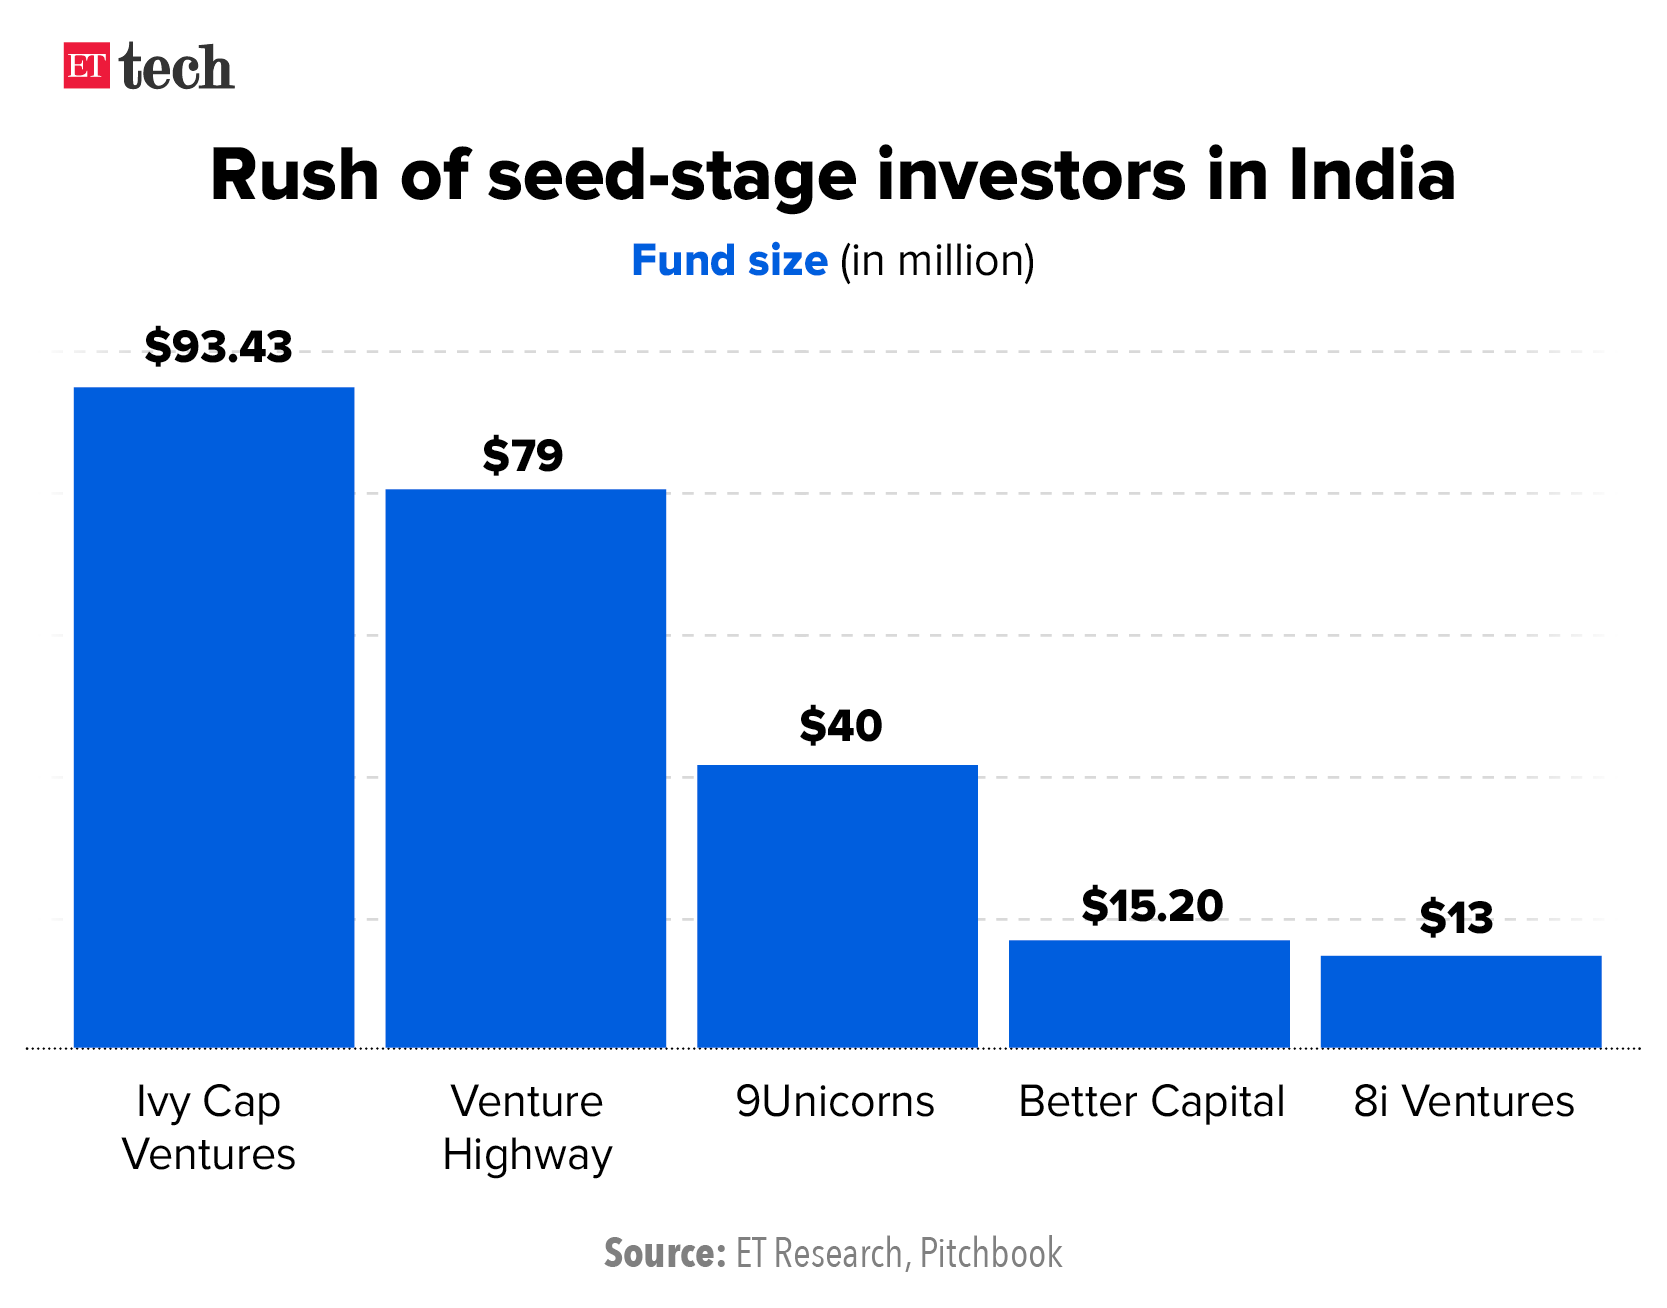 Rush of seed-stage investors in India